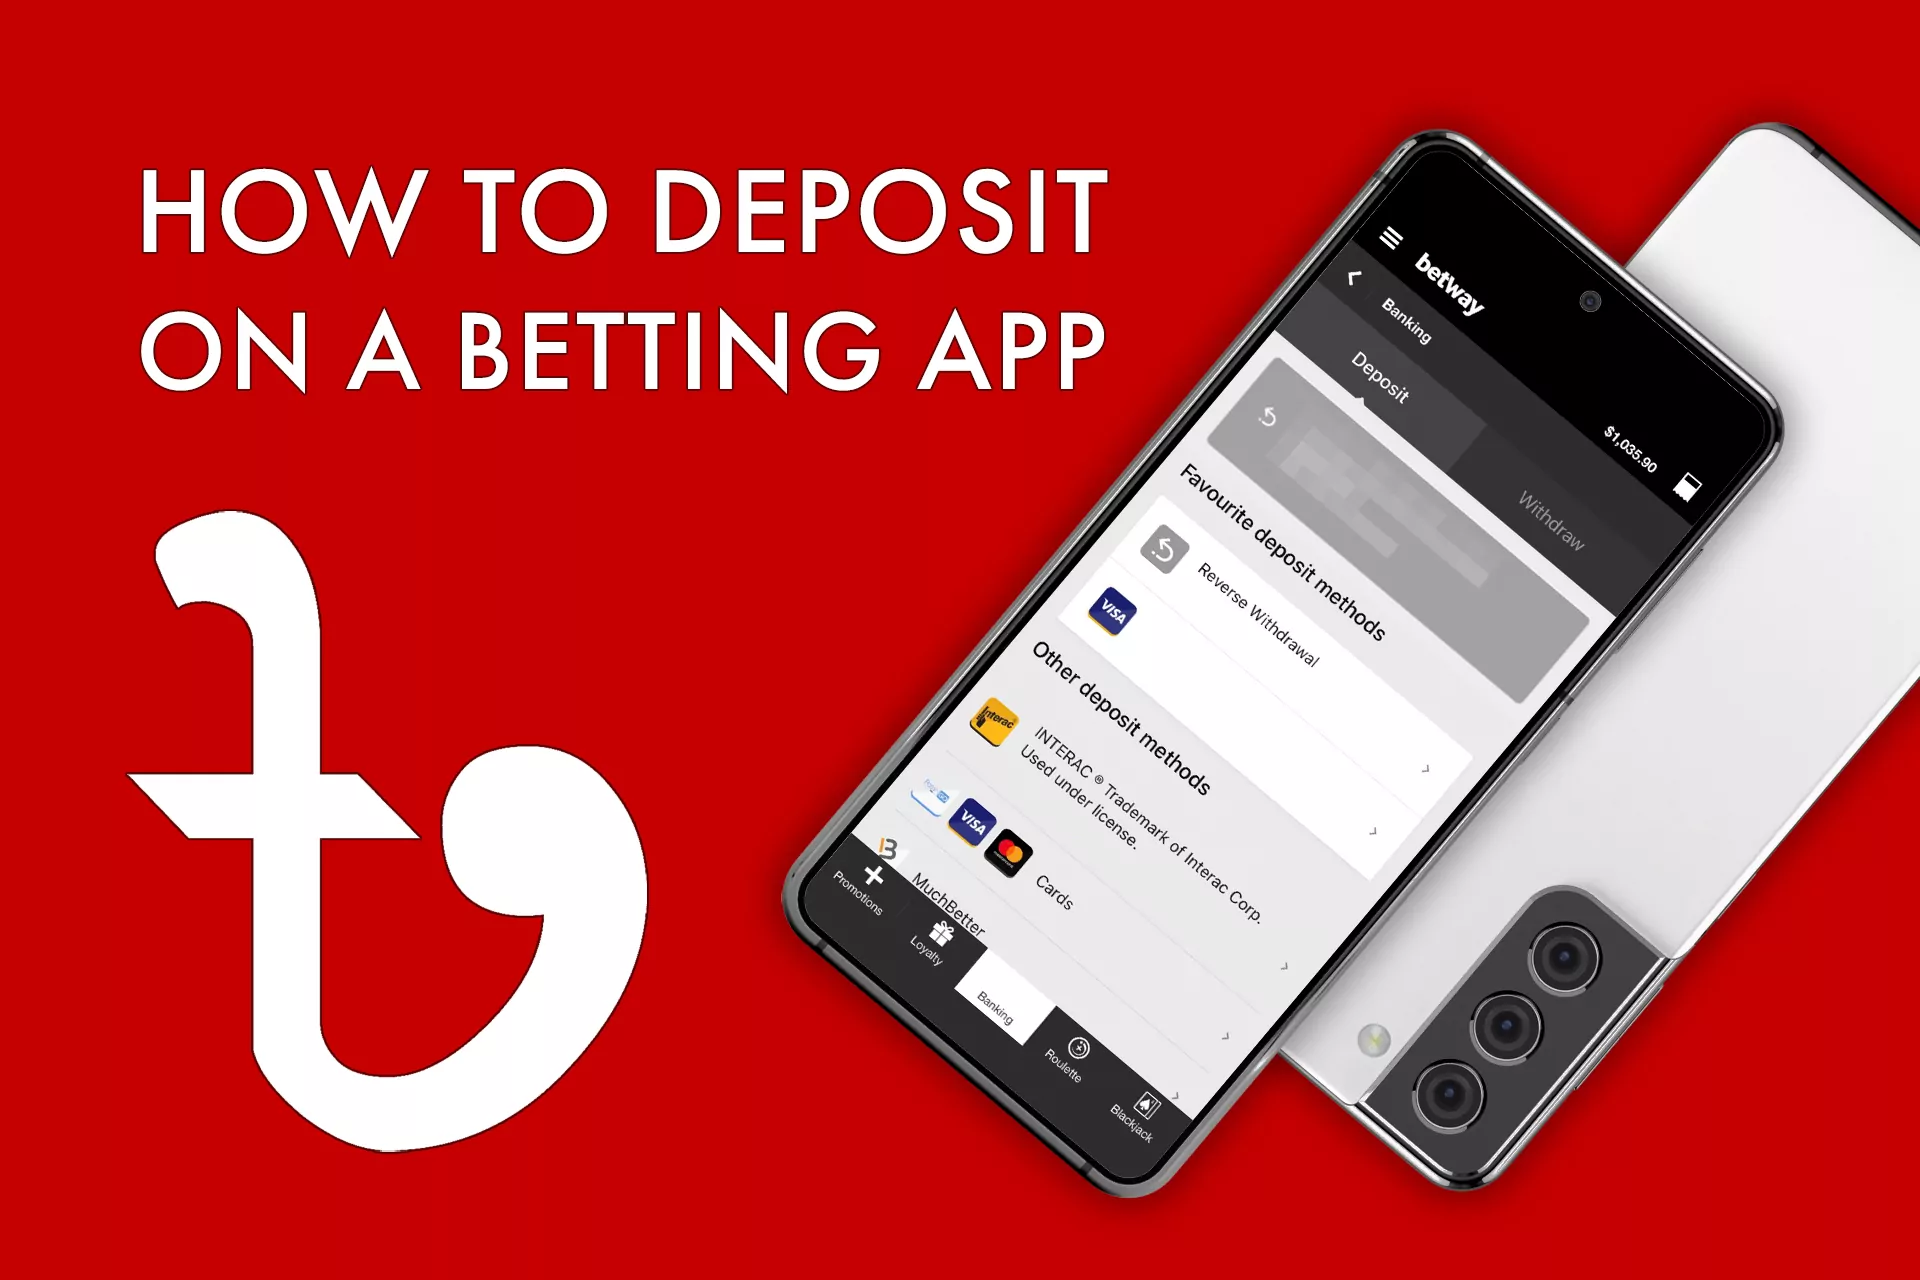 After you install the app and log in, top up your account to be allowed to place bets.